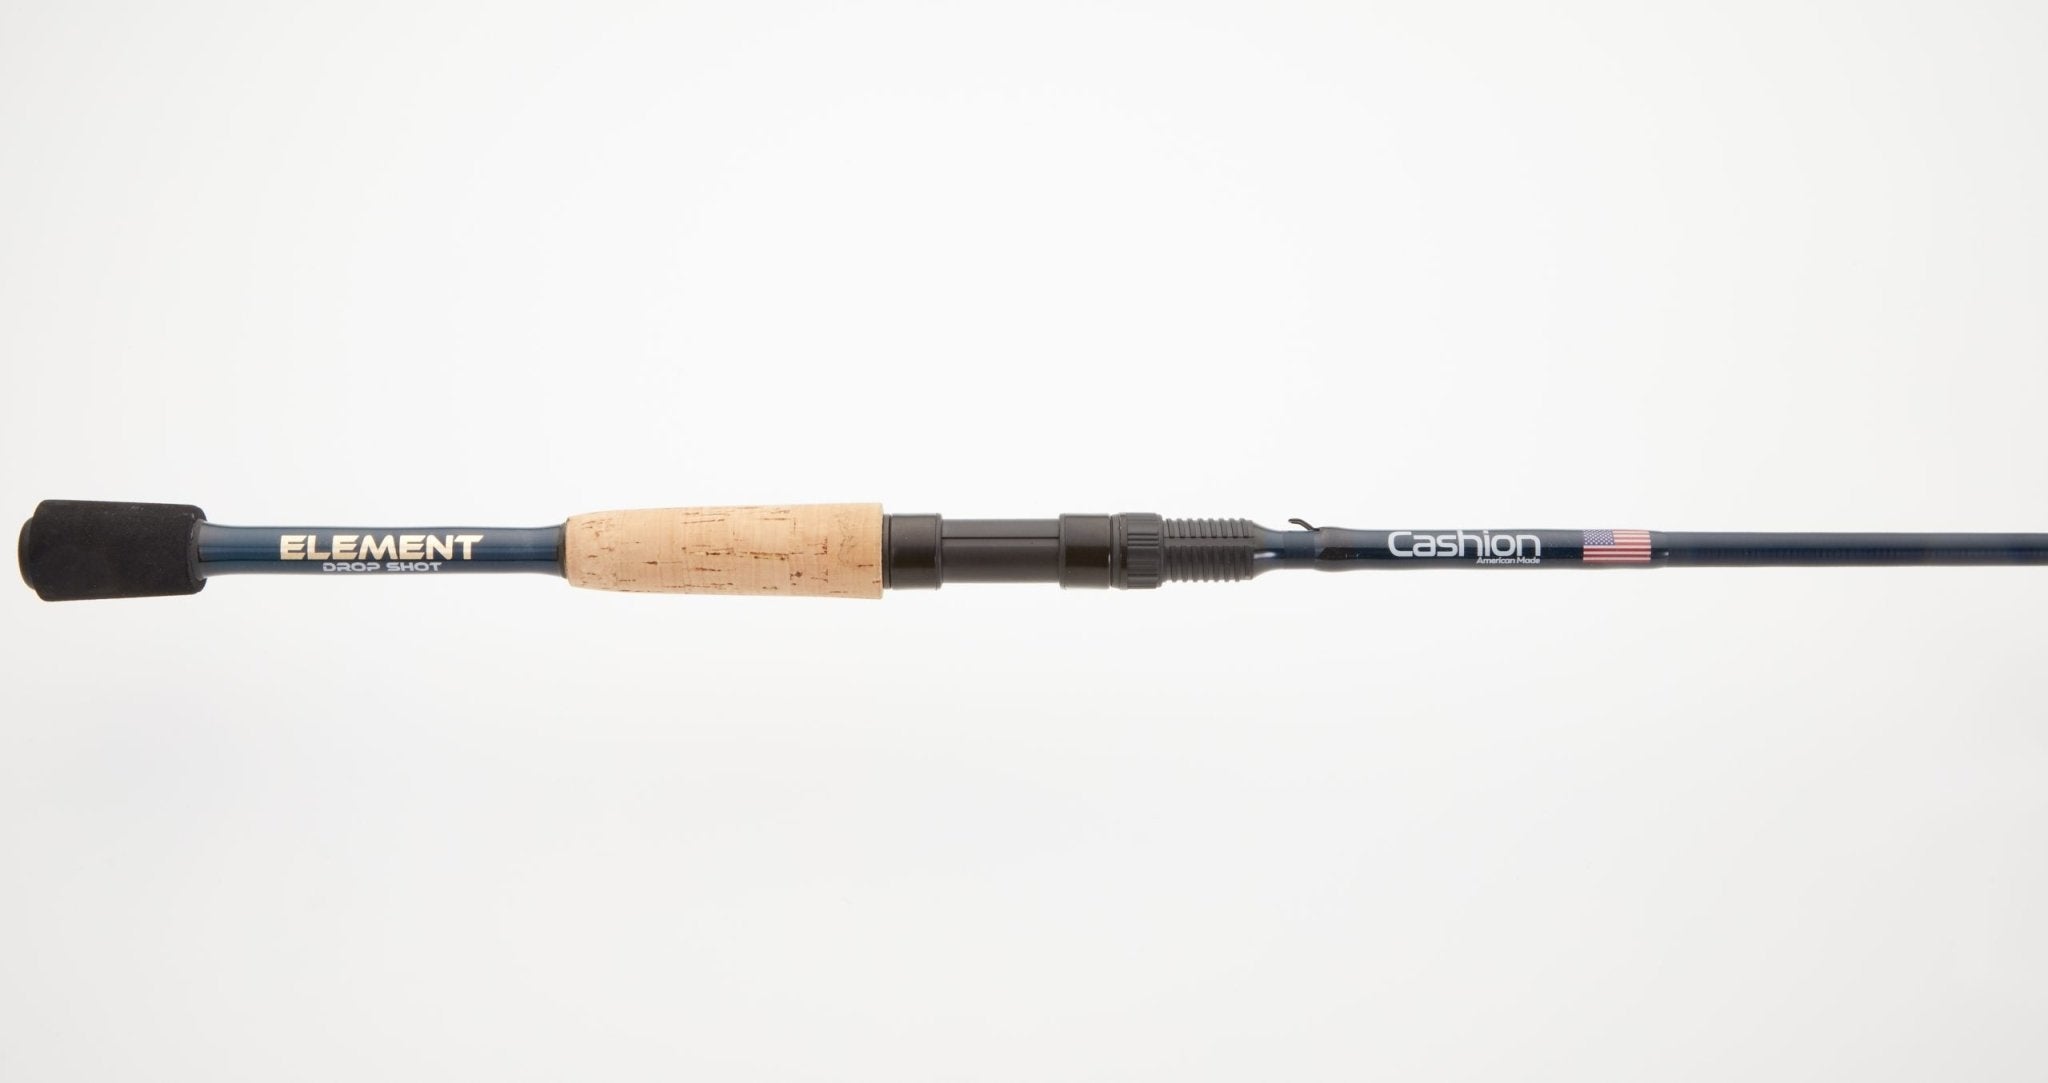 Cashion Element Series Drop Shot Spinning Rod - Hamilton Bait and Tackle